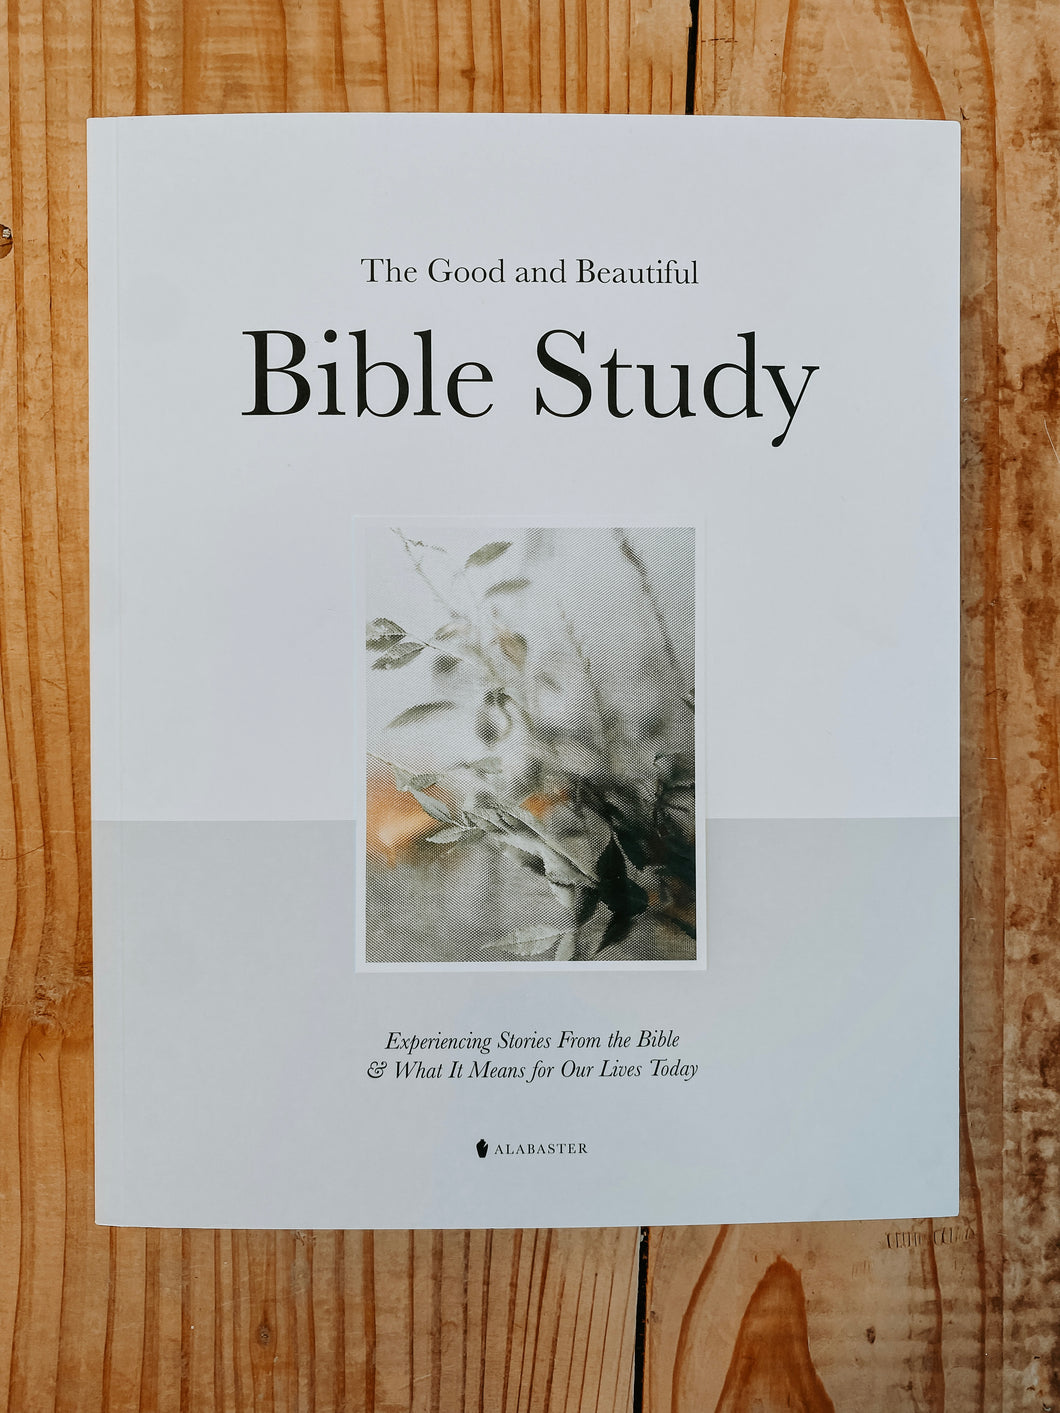 The Good and Beautiful Bible Study